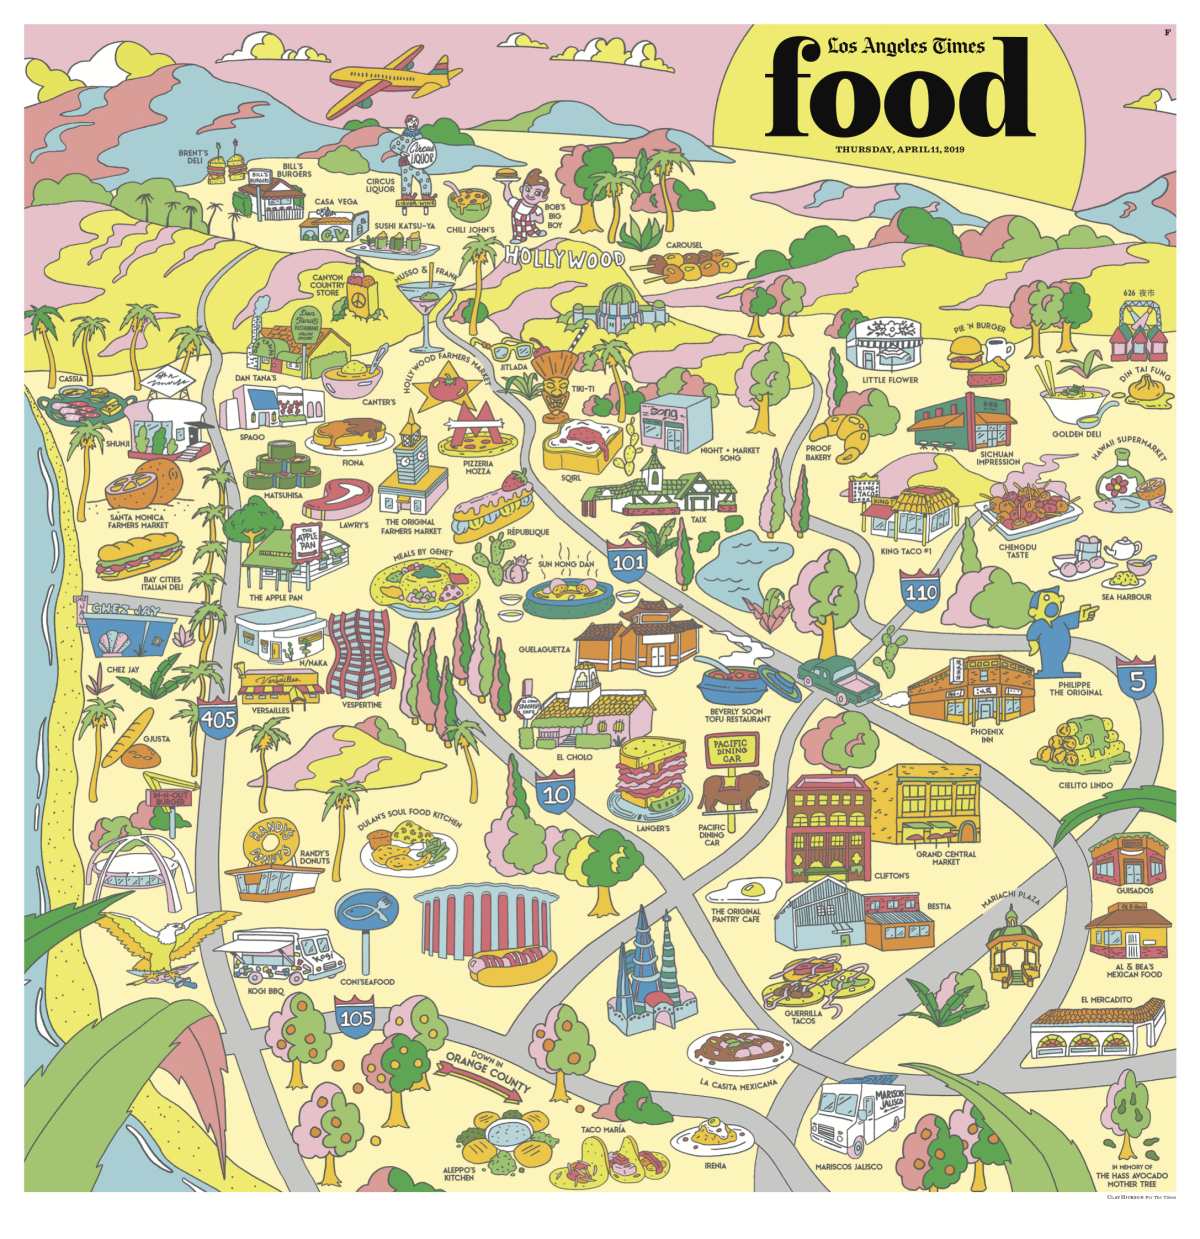 Los Angeles Times Food cover, April 11, 2019